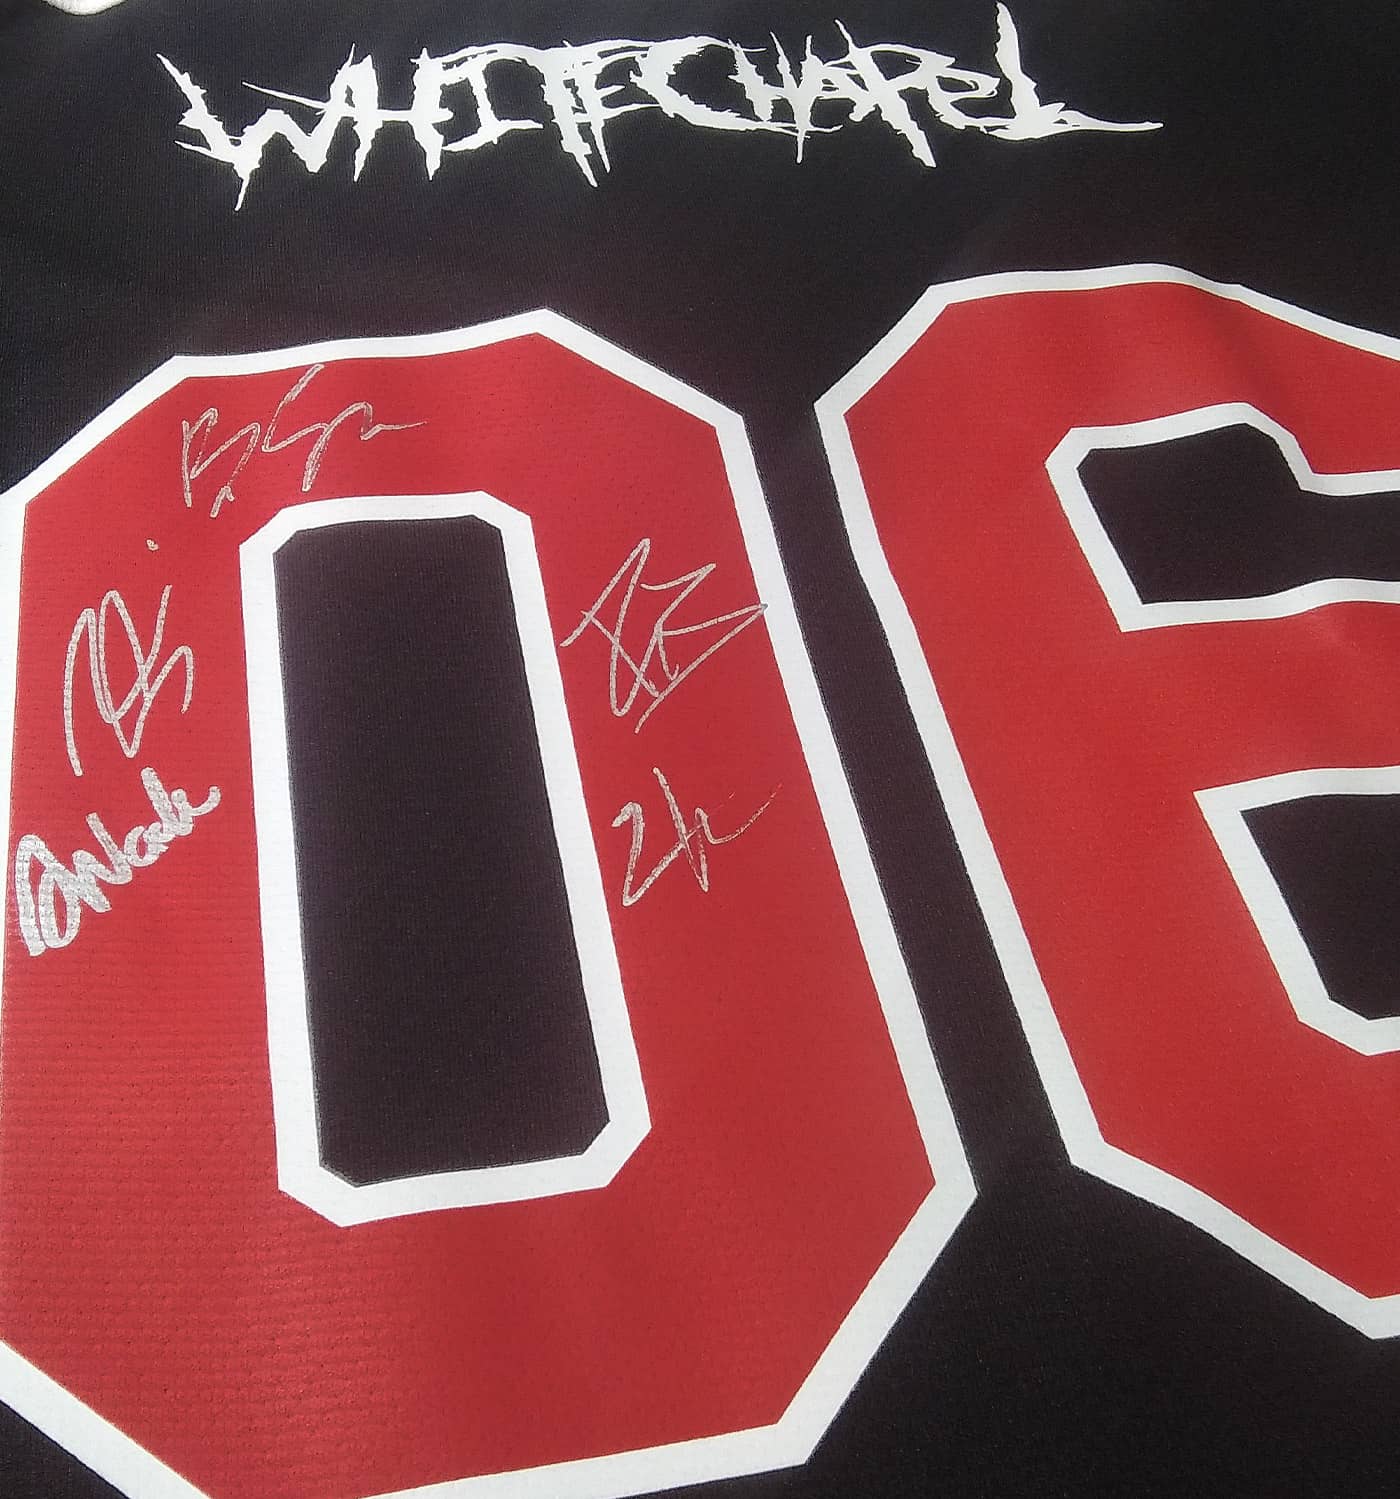 WHITECHAPEL 'REPROGRAMMED TO SKATE' deluxe limited edition autographed hockey jersey in black, red, and white back view